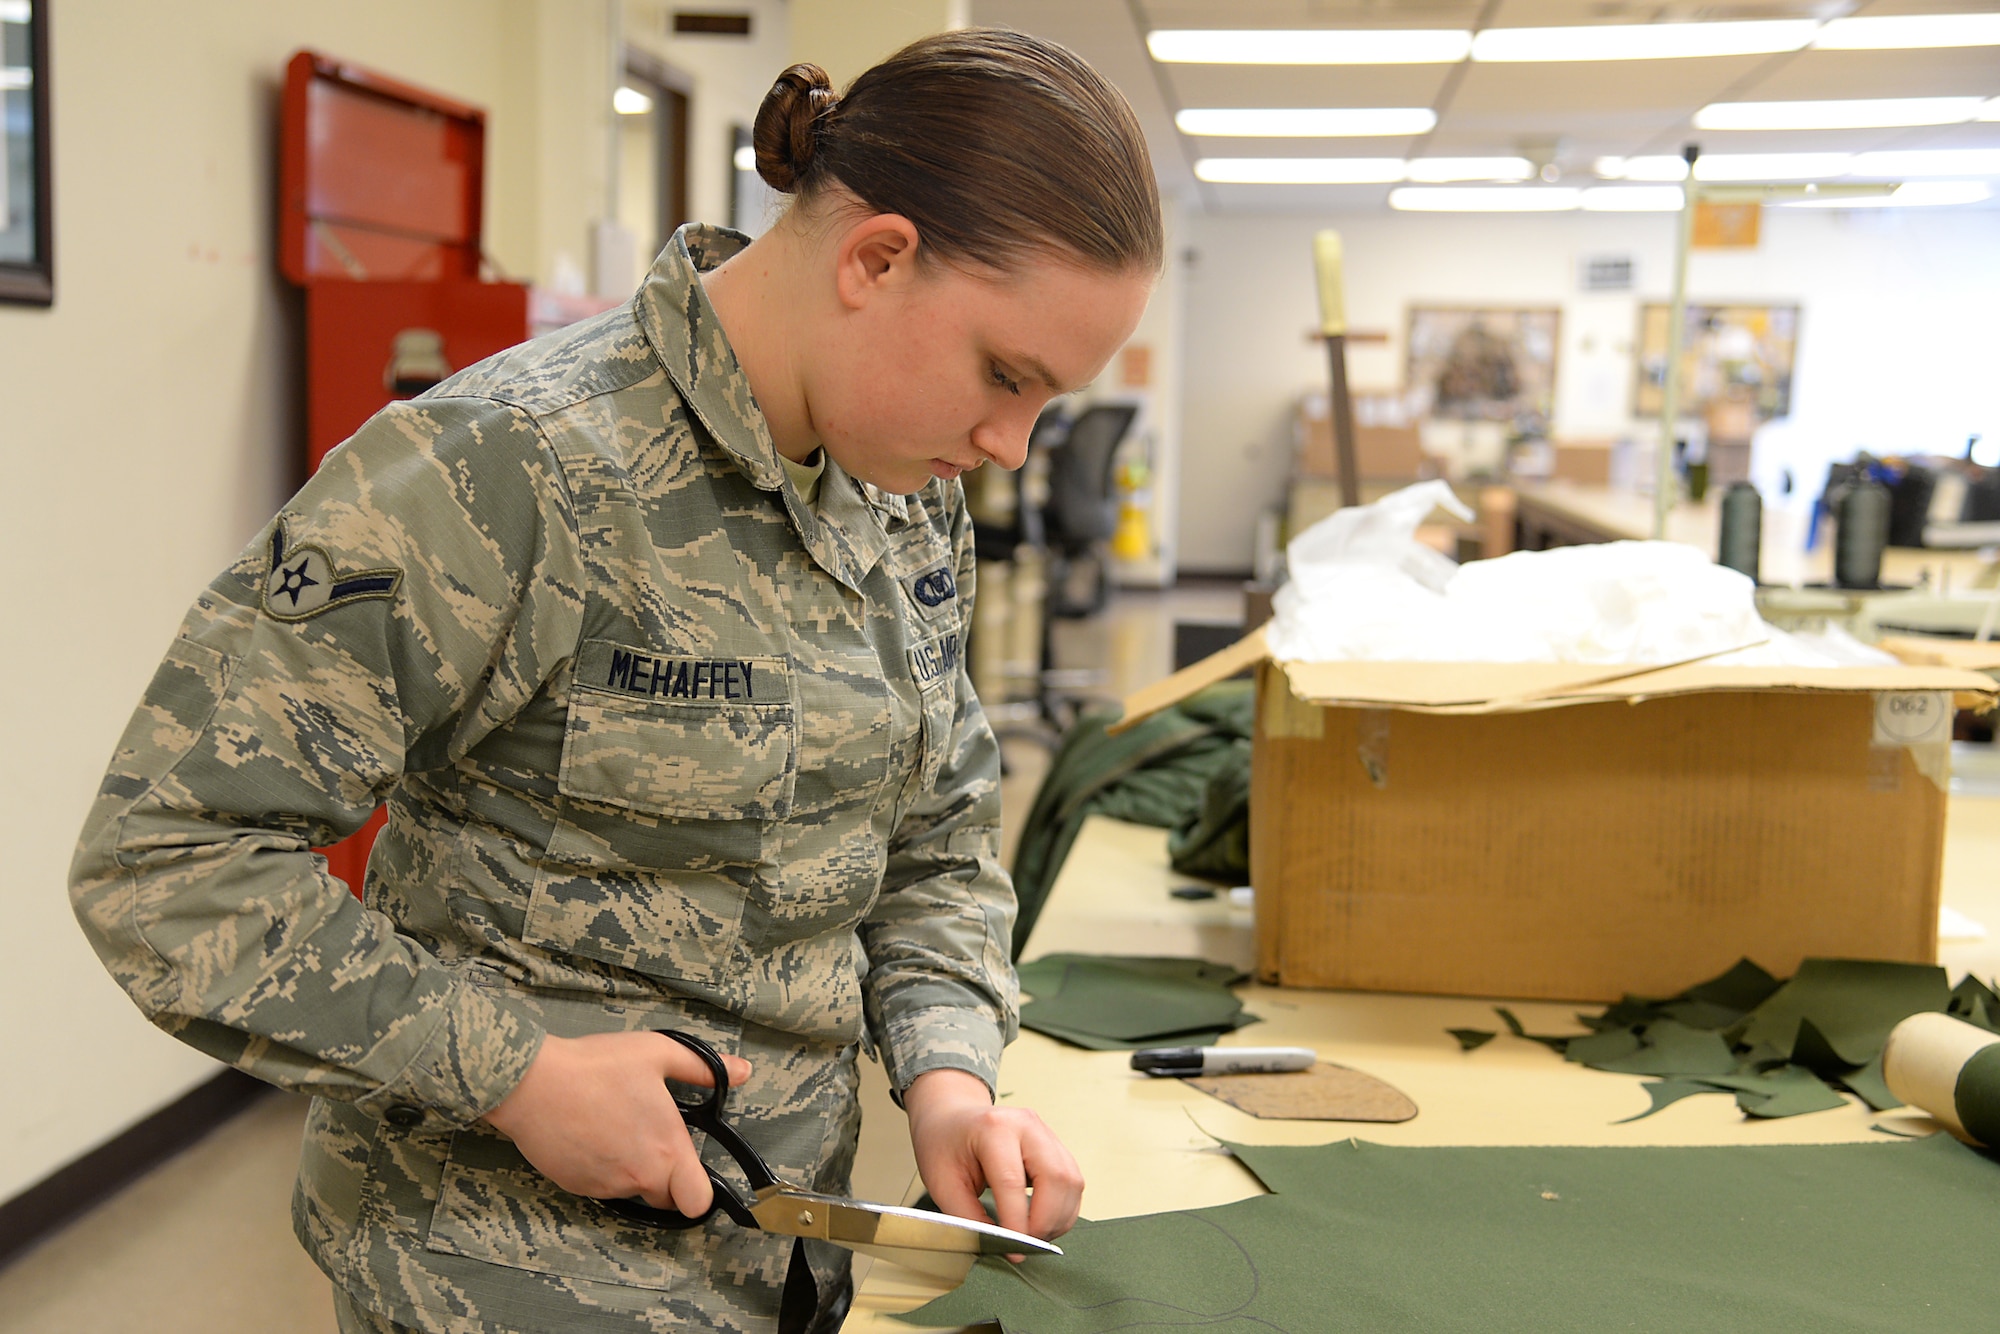 A picture of U.S. Air Force Airman Makayla P. Mehaffey, an aviation resource manager, volunteering to prepare fabric for face masks